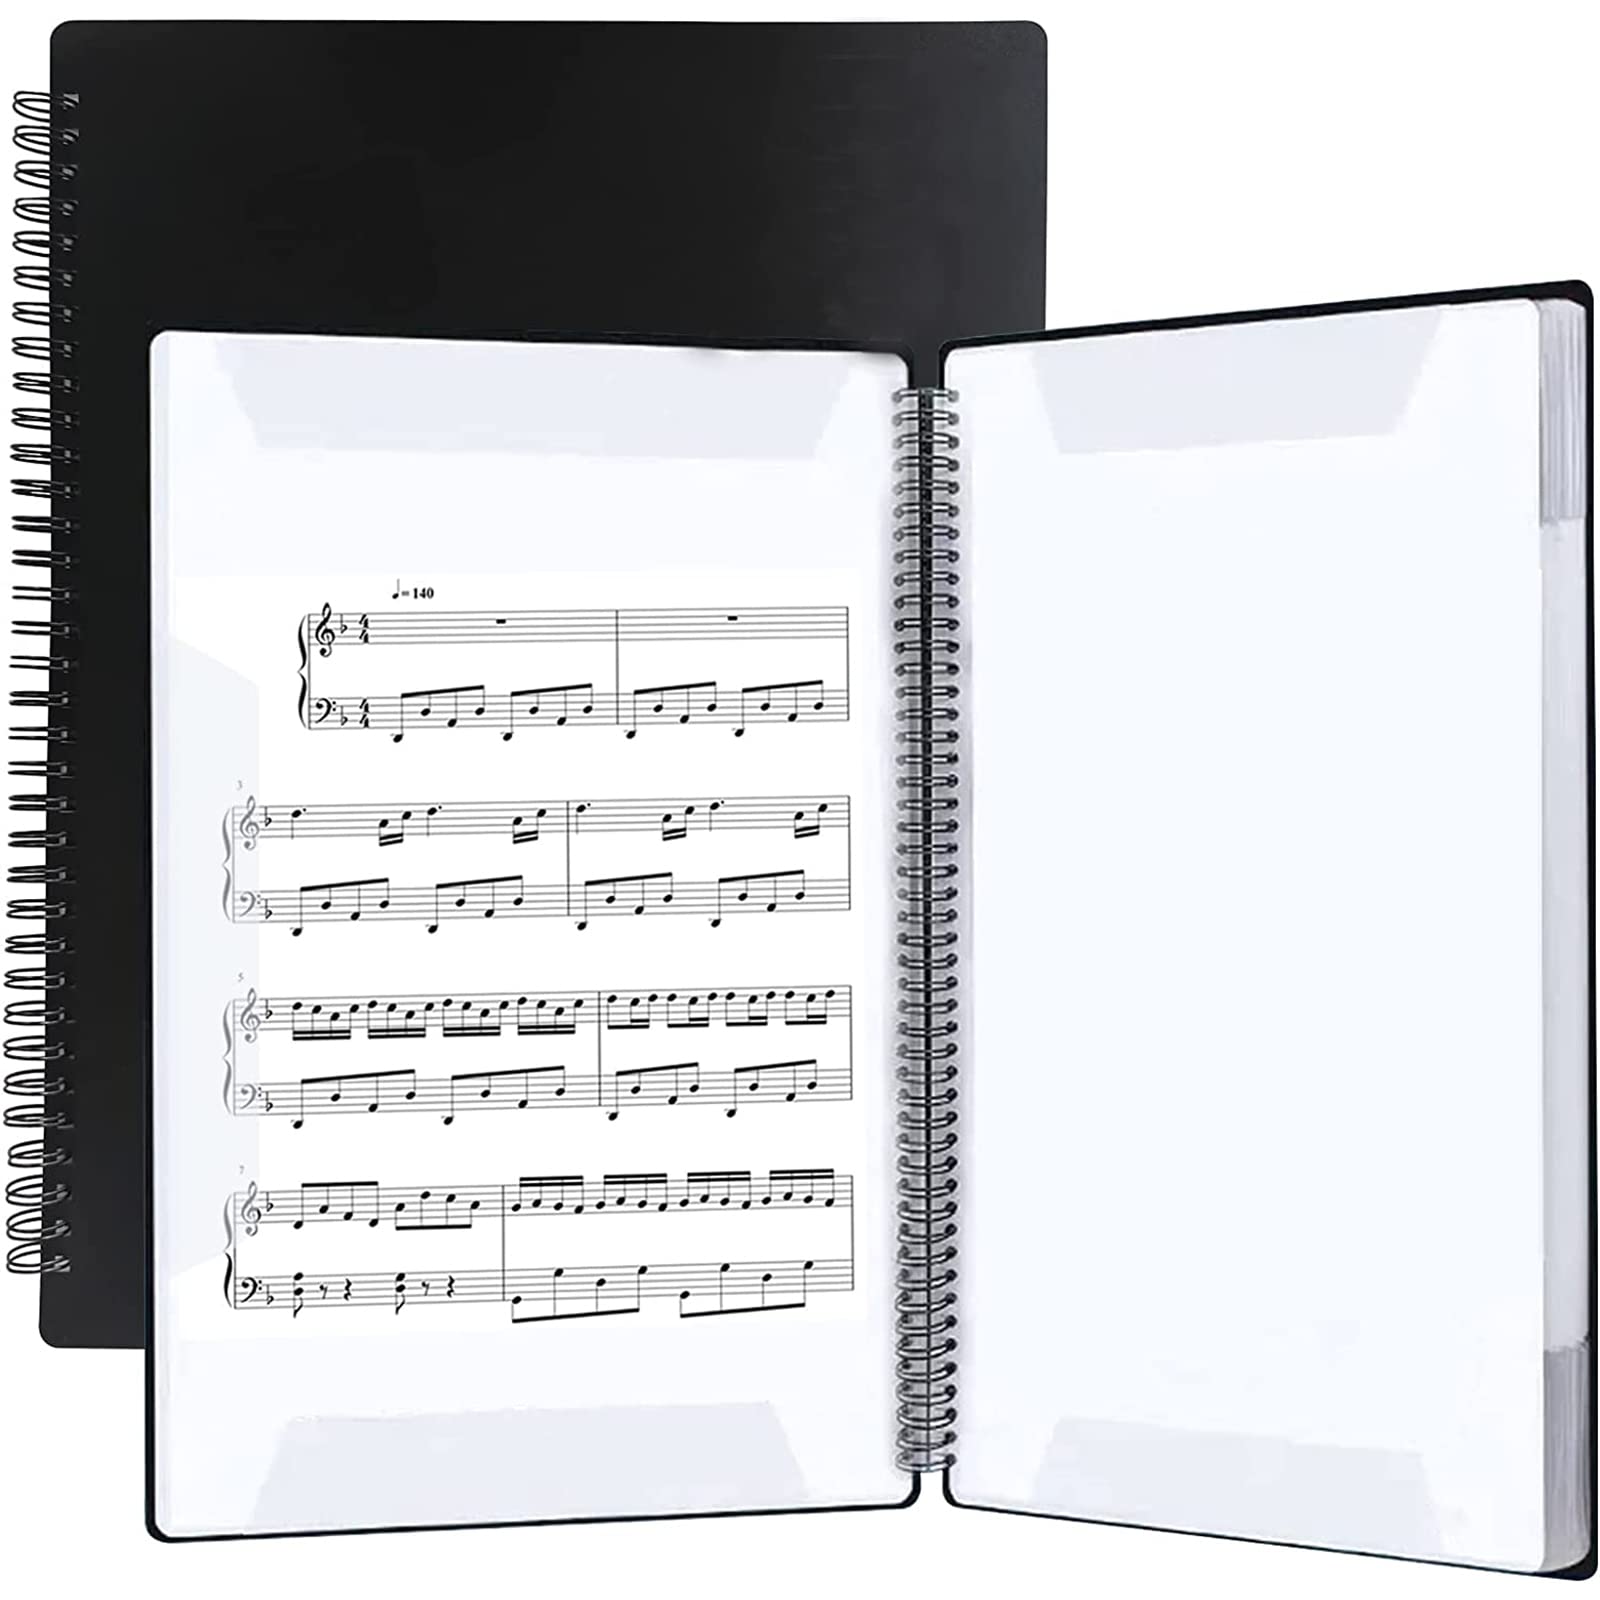  musical score file A4 size band file musical score inserting musical score holder plain black 2 surface 40 page direct paper . included .. design see opening wind instrumental music piano clear fa